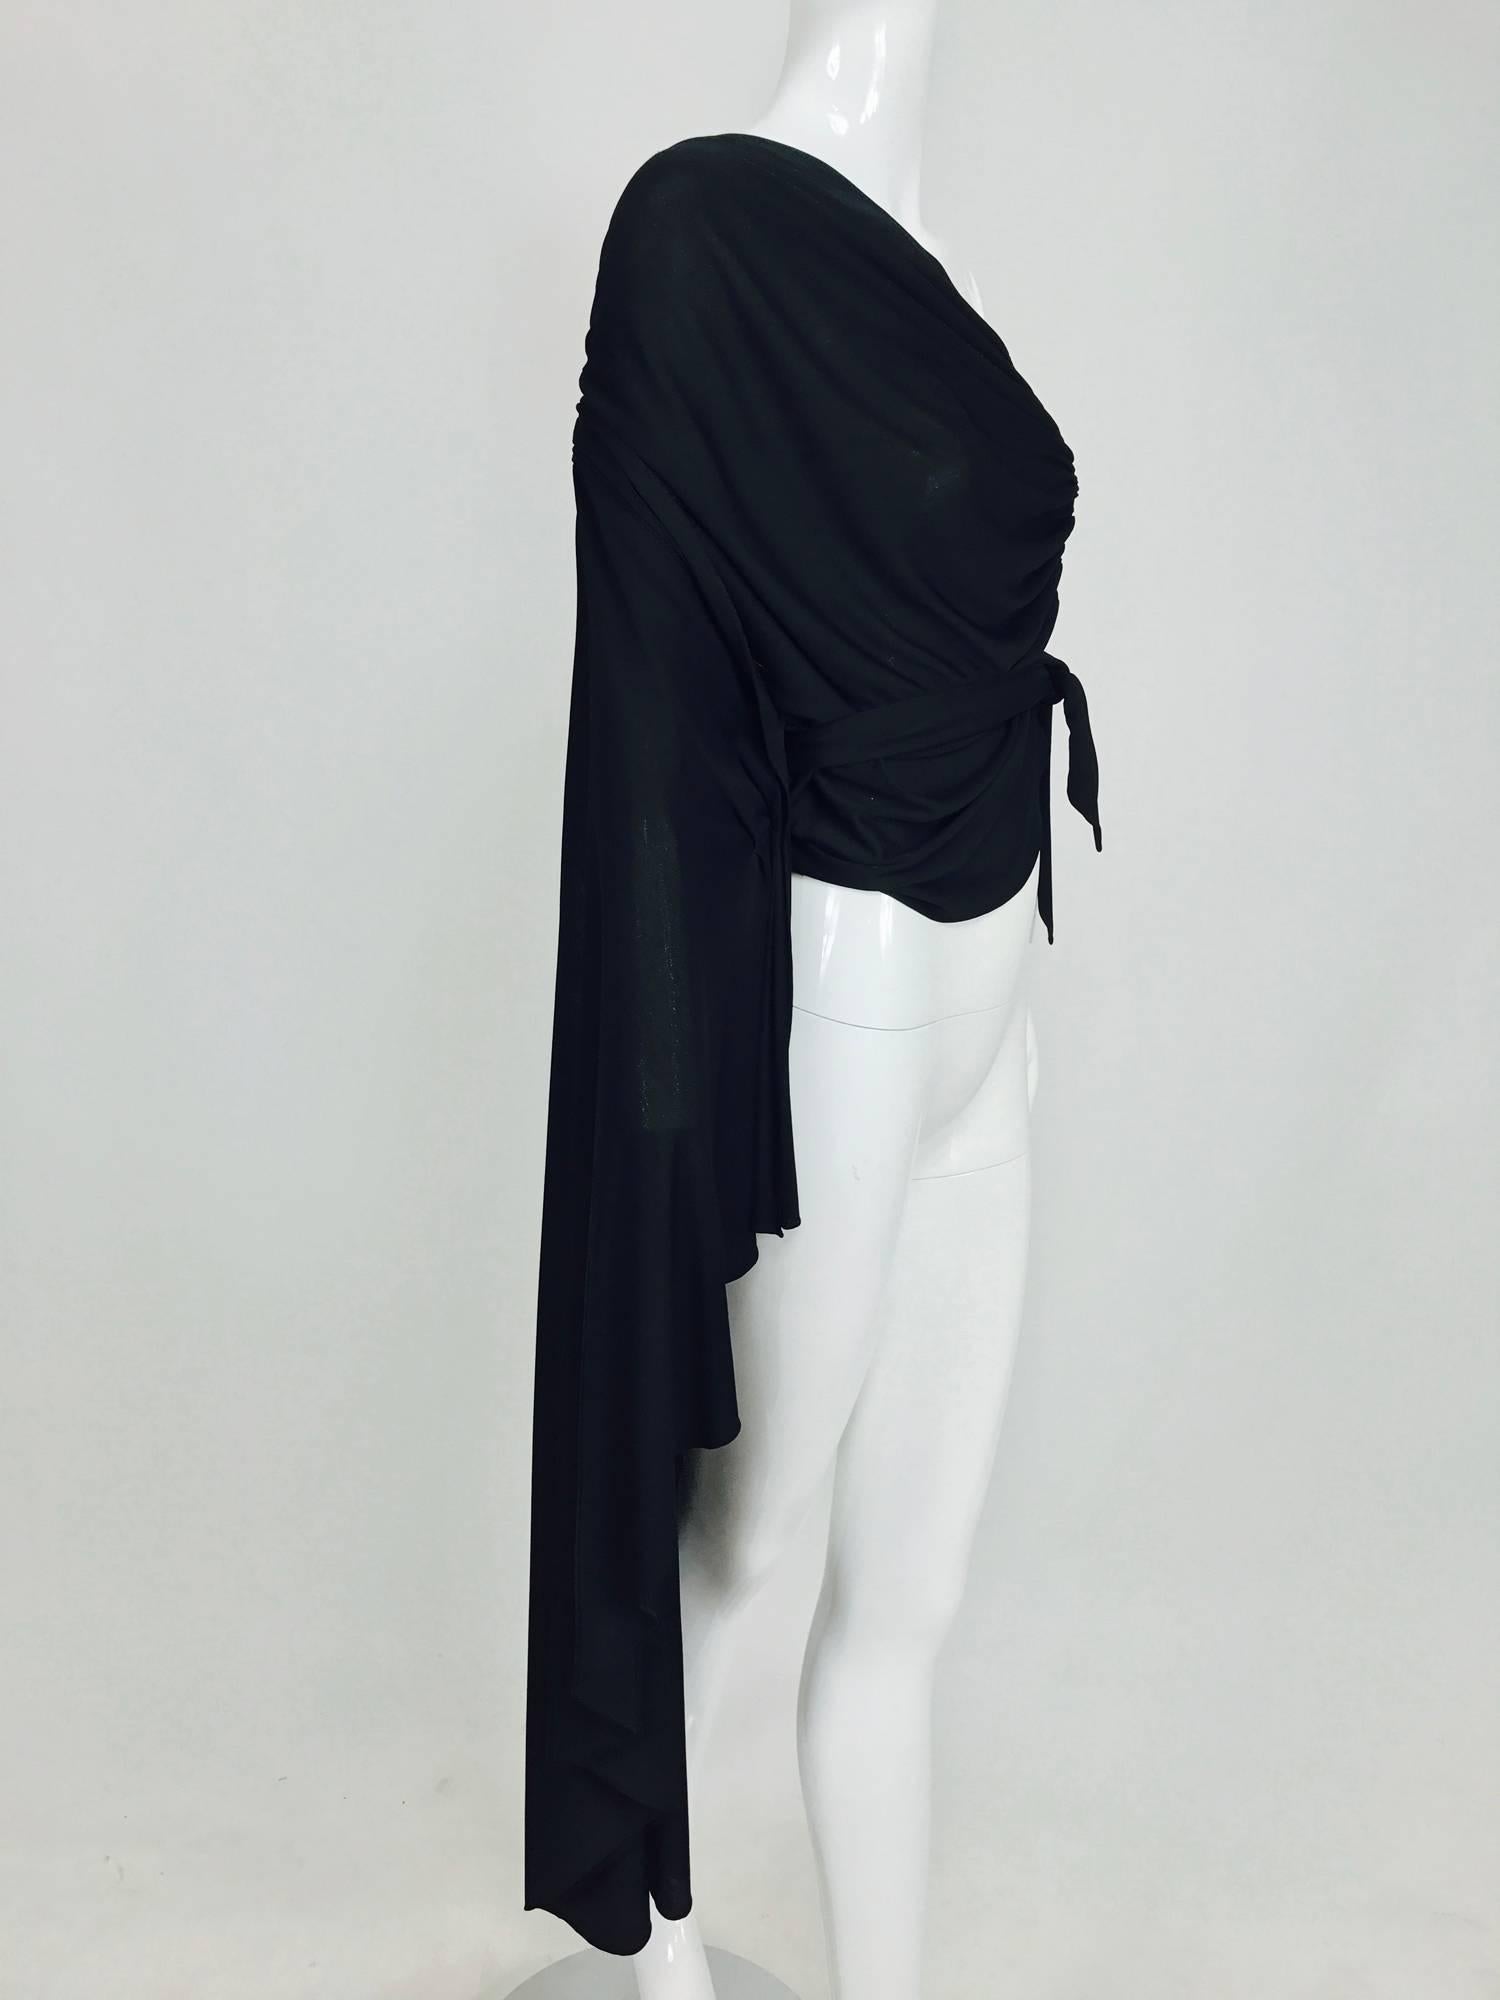 Rare Valentina labeled couture black silk jersey asymmetrical tunic top ...